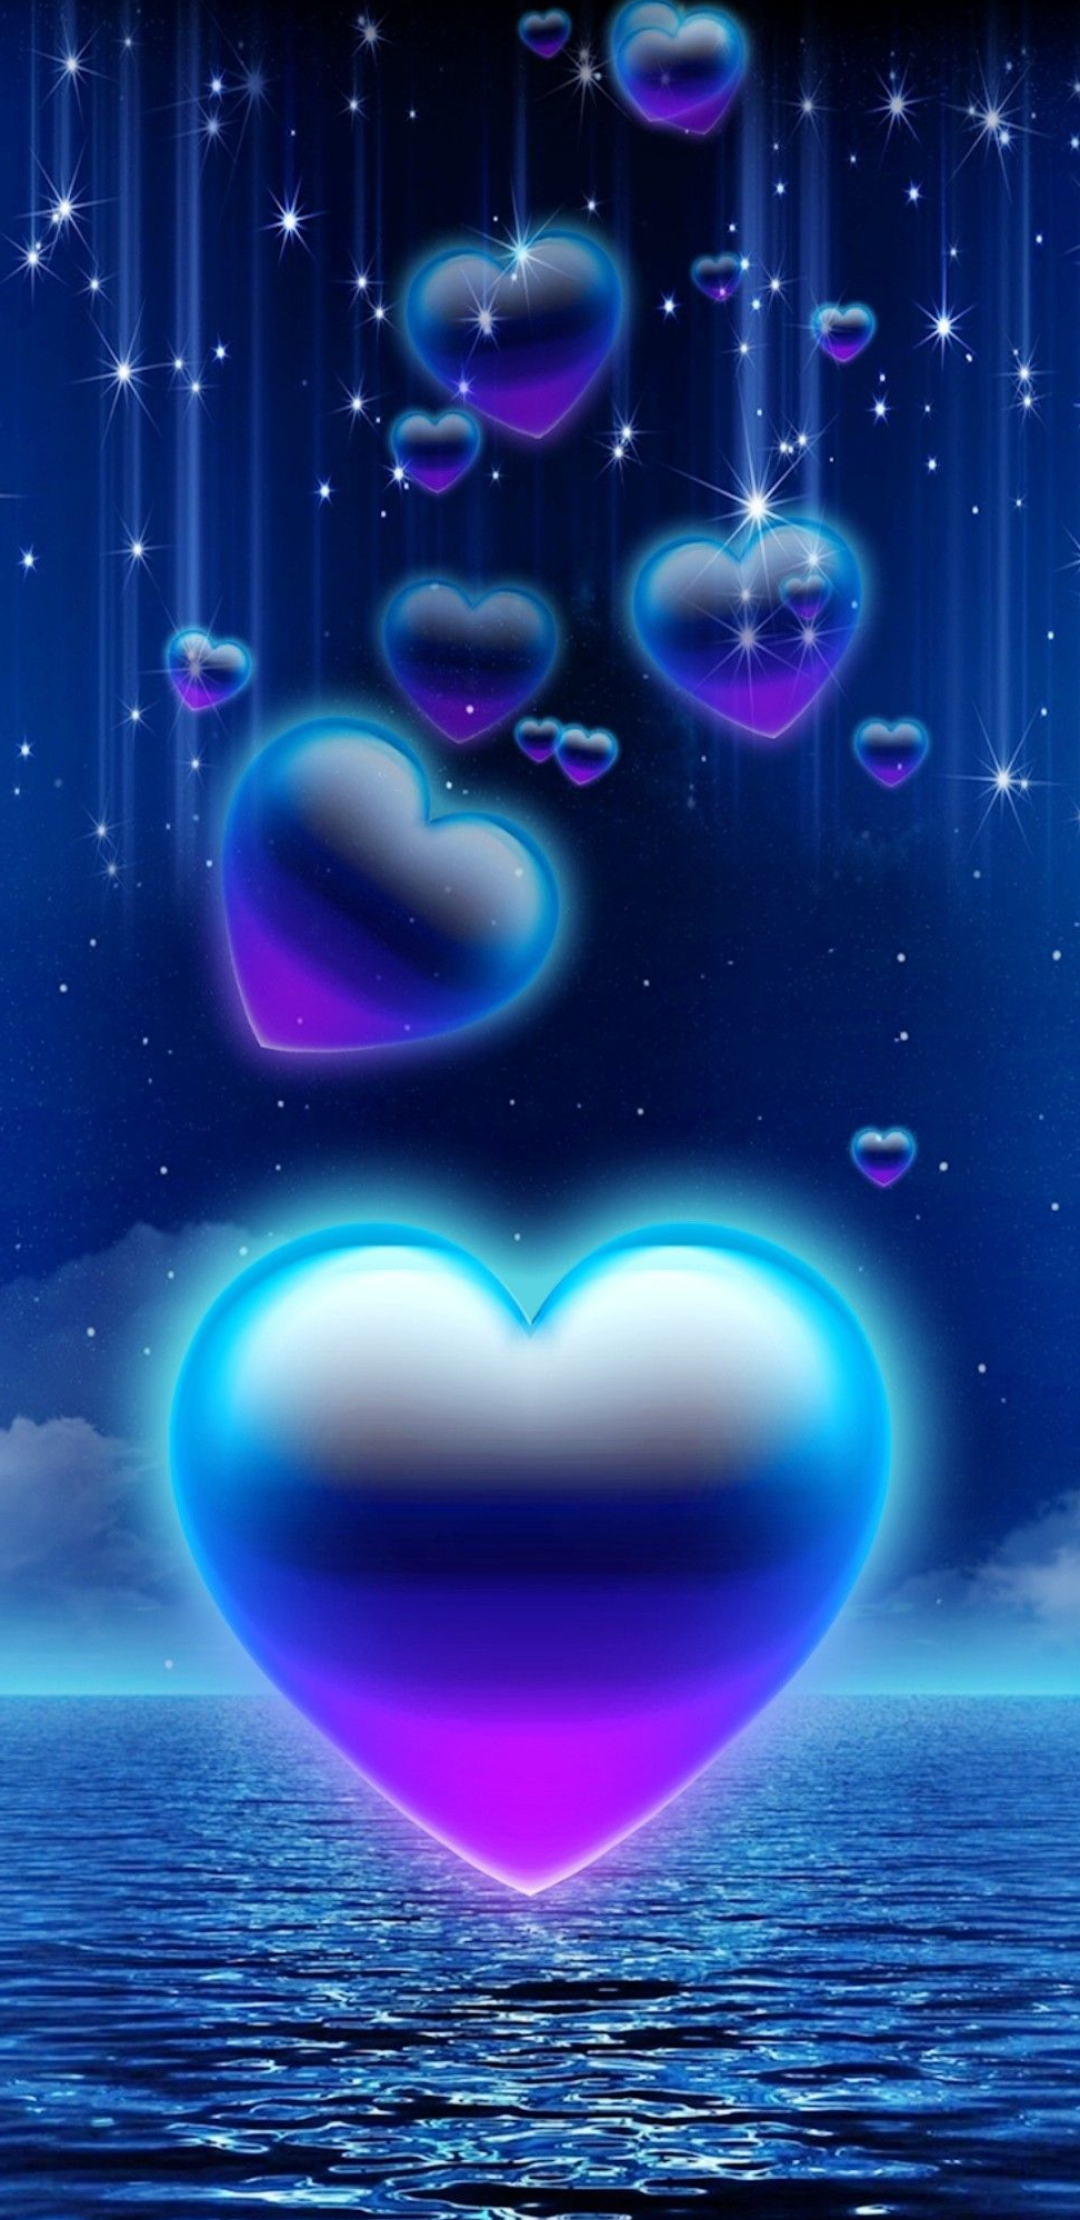 1080x2220 Blue and Purple Hearts Wallpapers Top Free Blue and Purple Hearts Backgrounds